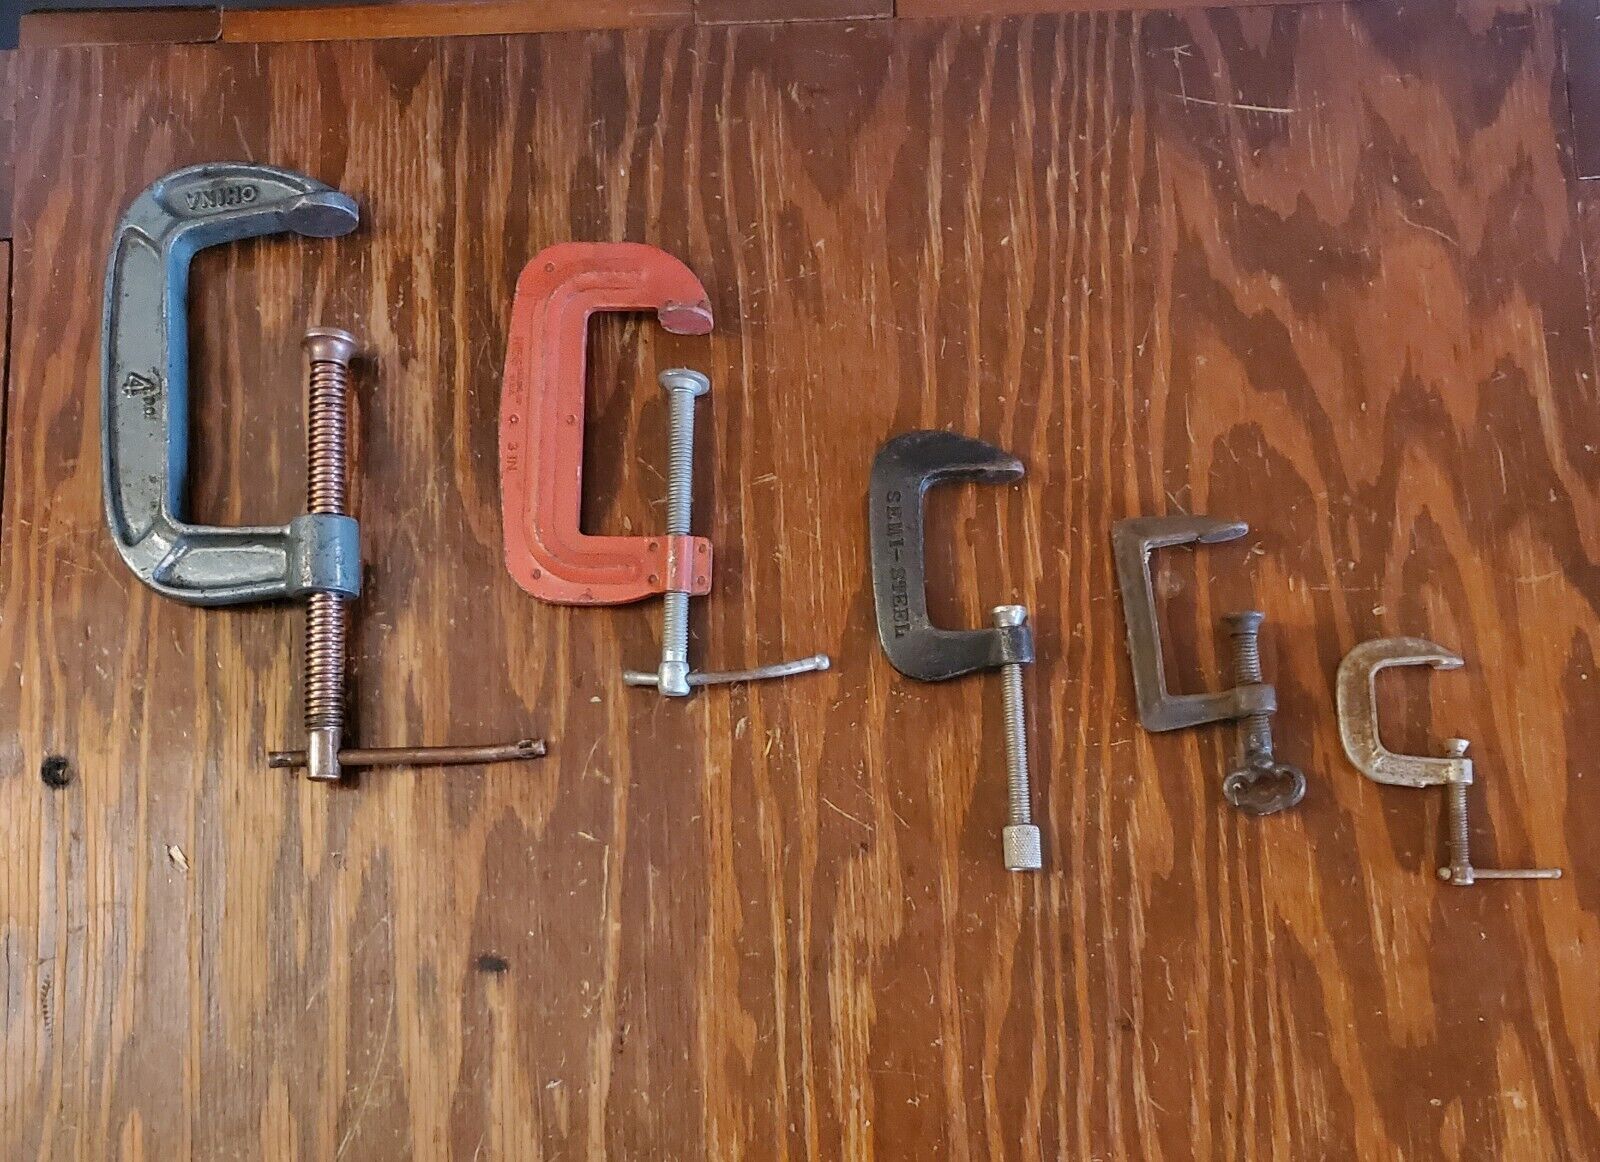 Lot of 5 C clamps.  Various sizes.